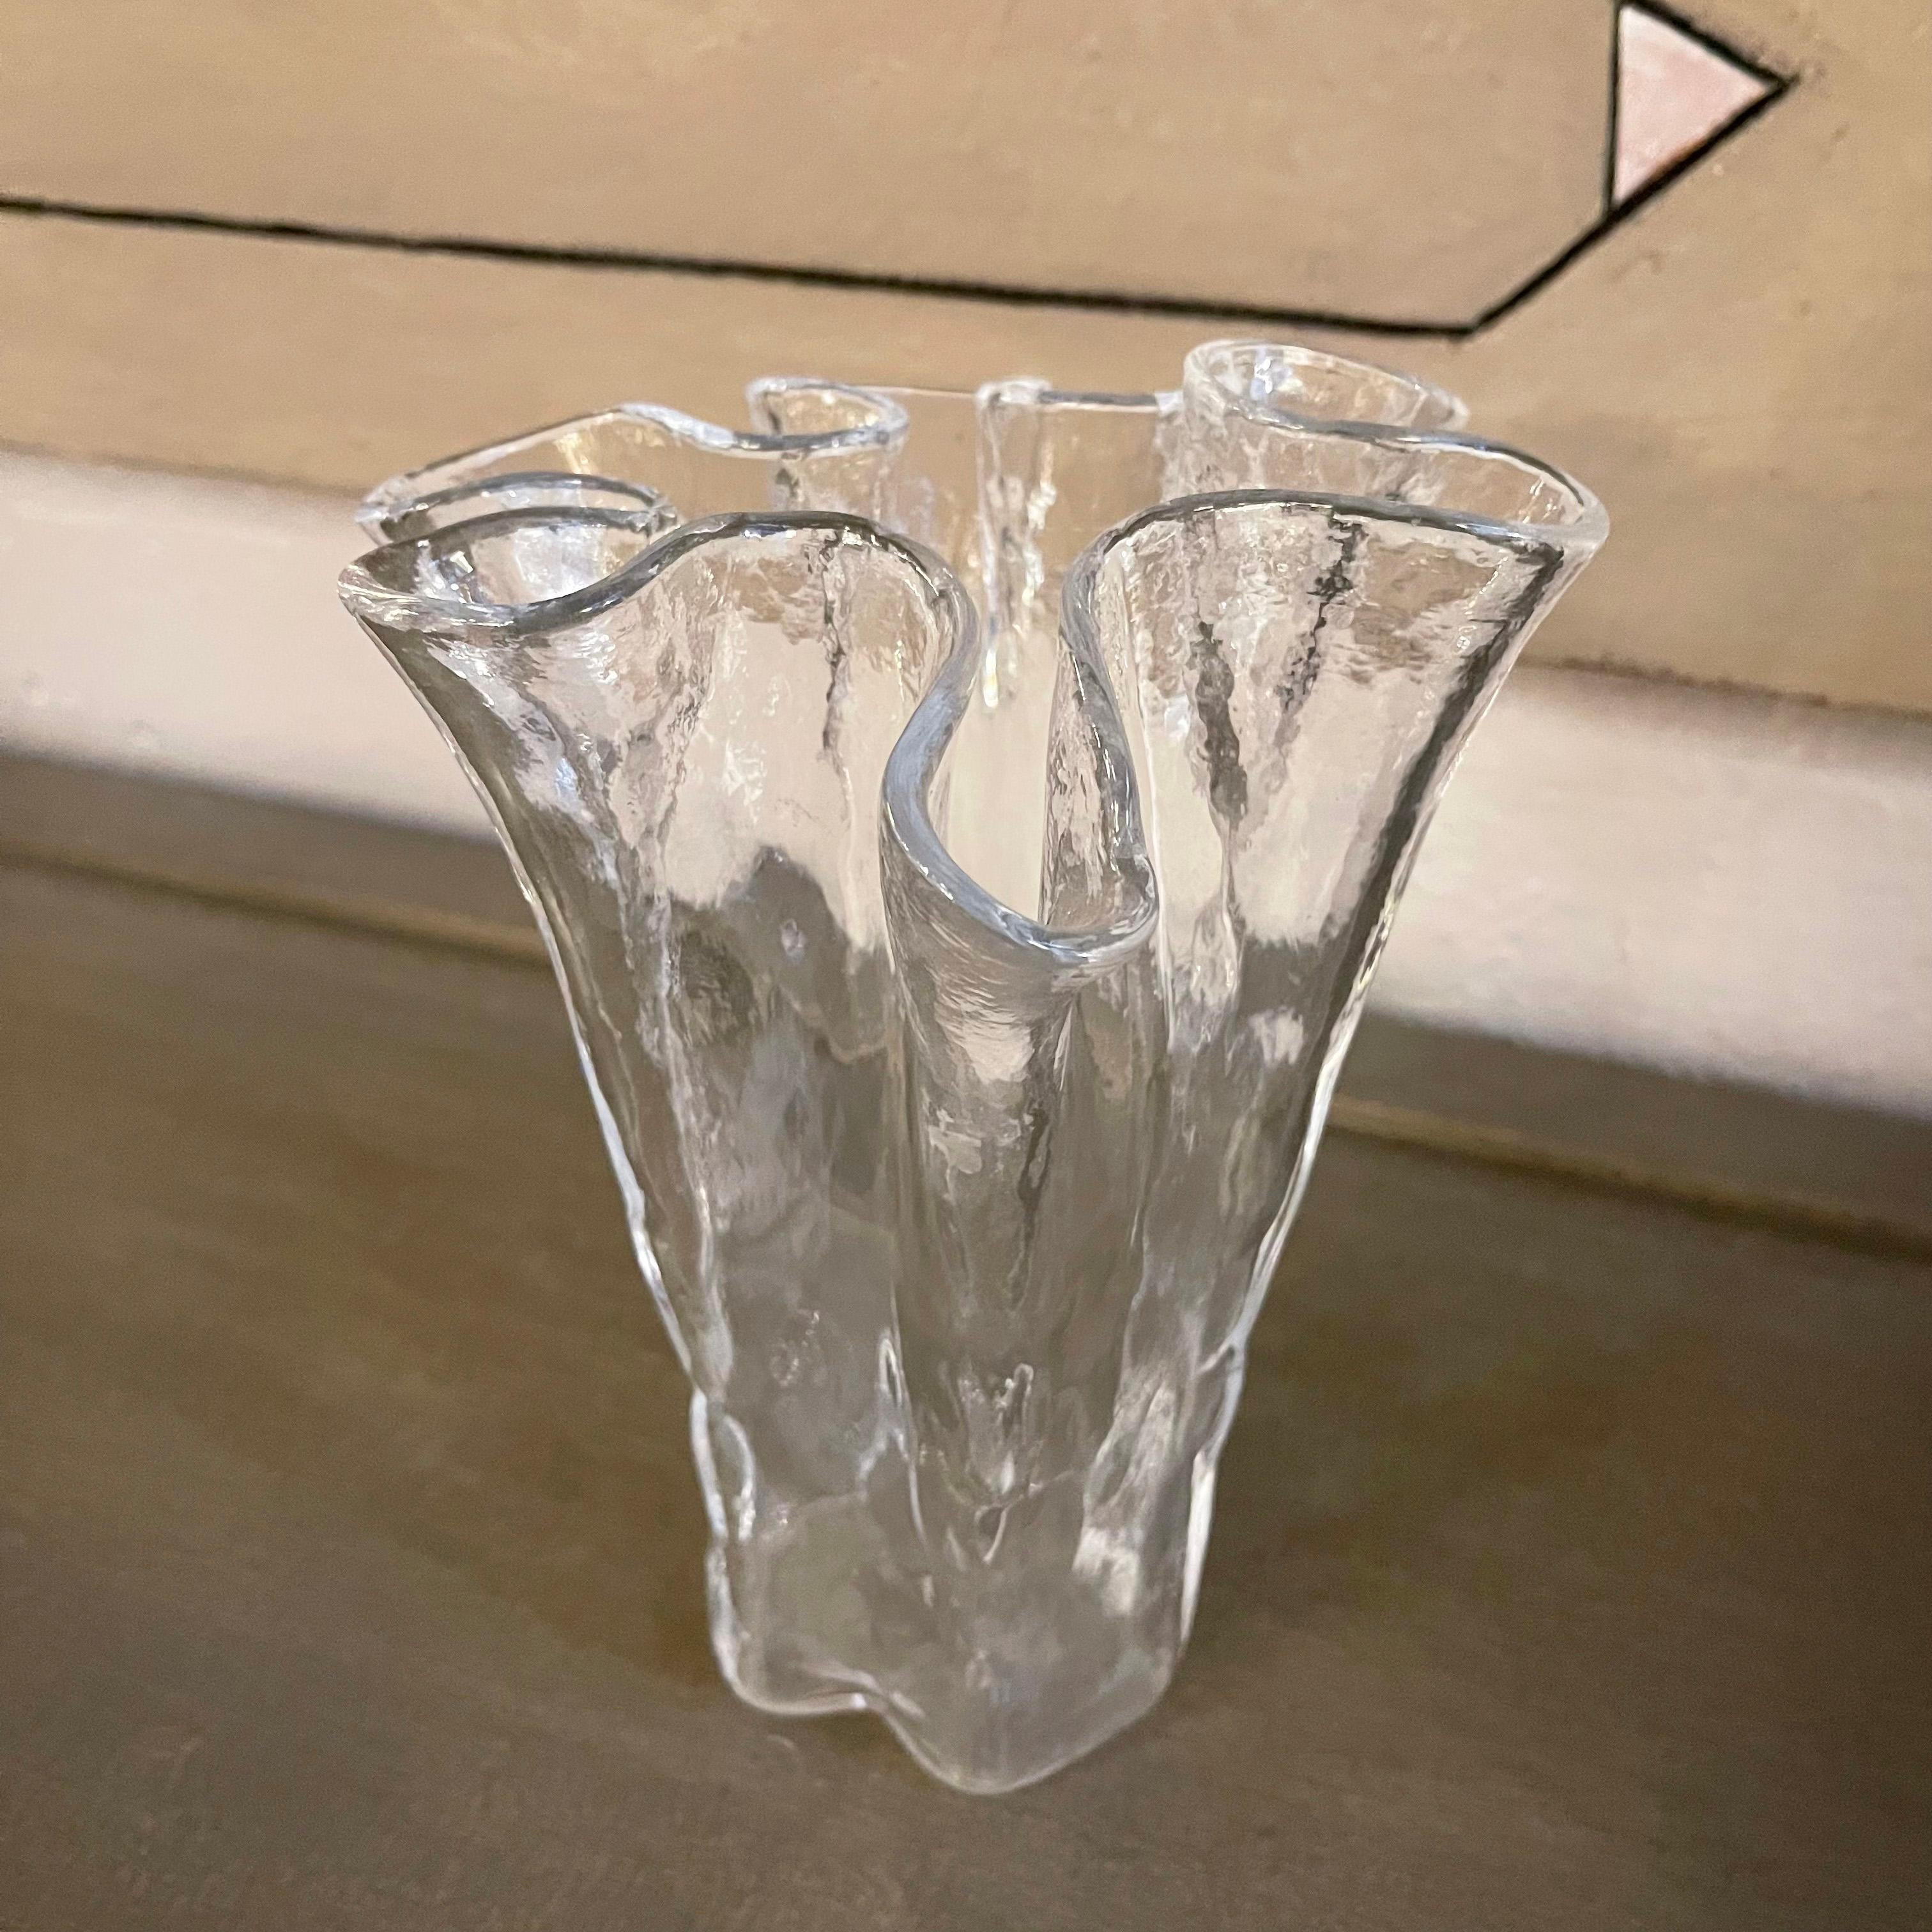 Decorative, clear, folded glass vase by Muurla, Finland.